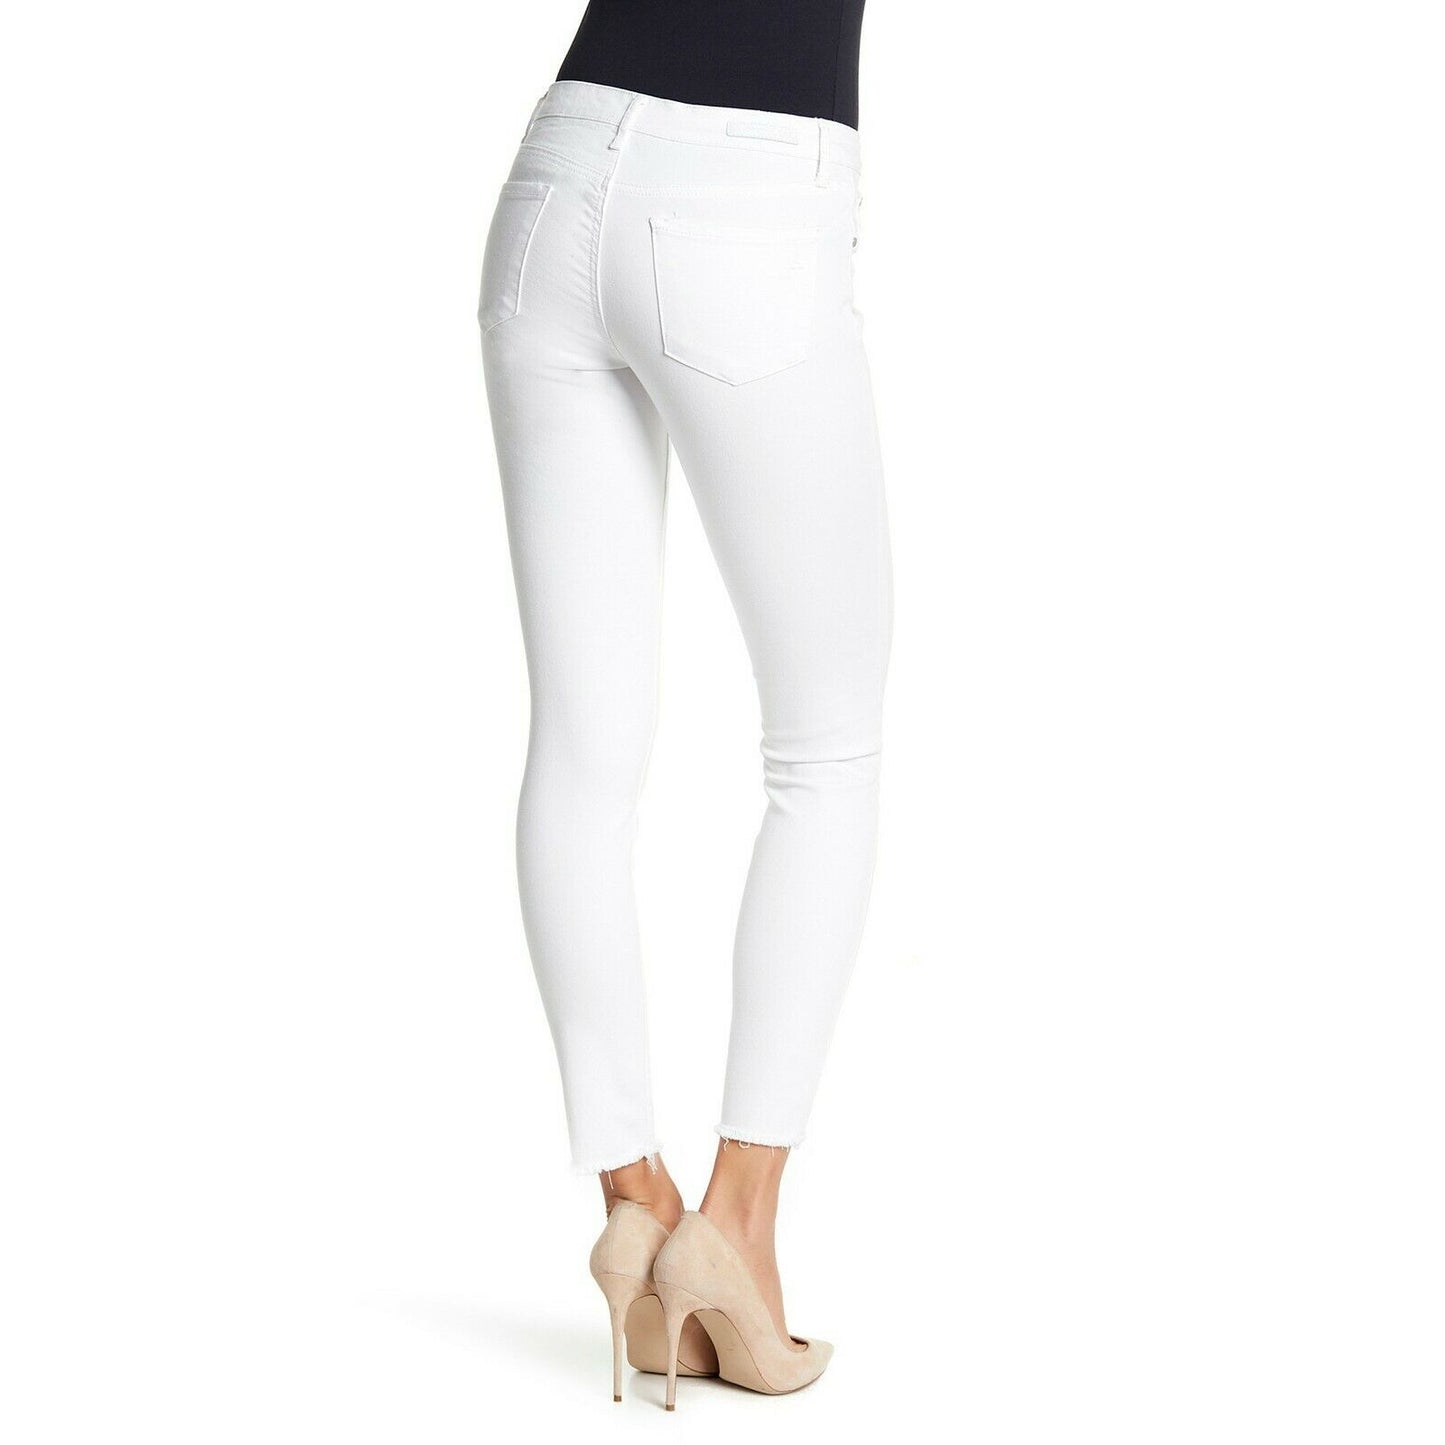 Articles of Society Munich White Sarah Skinny Mid Rise Jeans Size 32 NWT